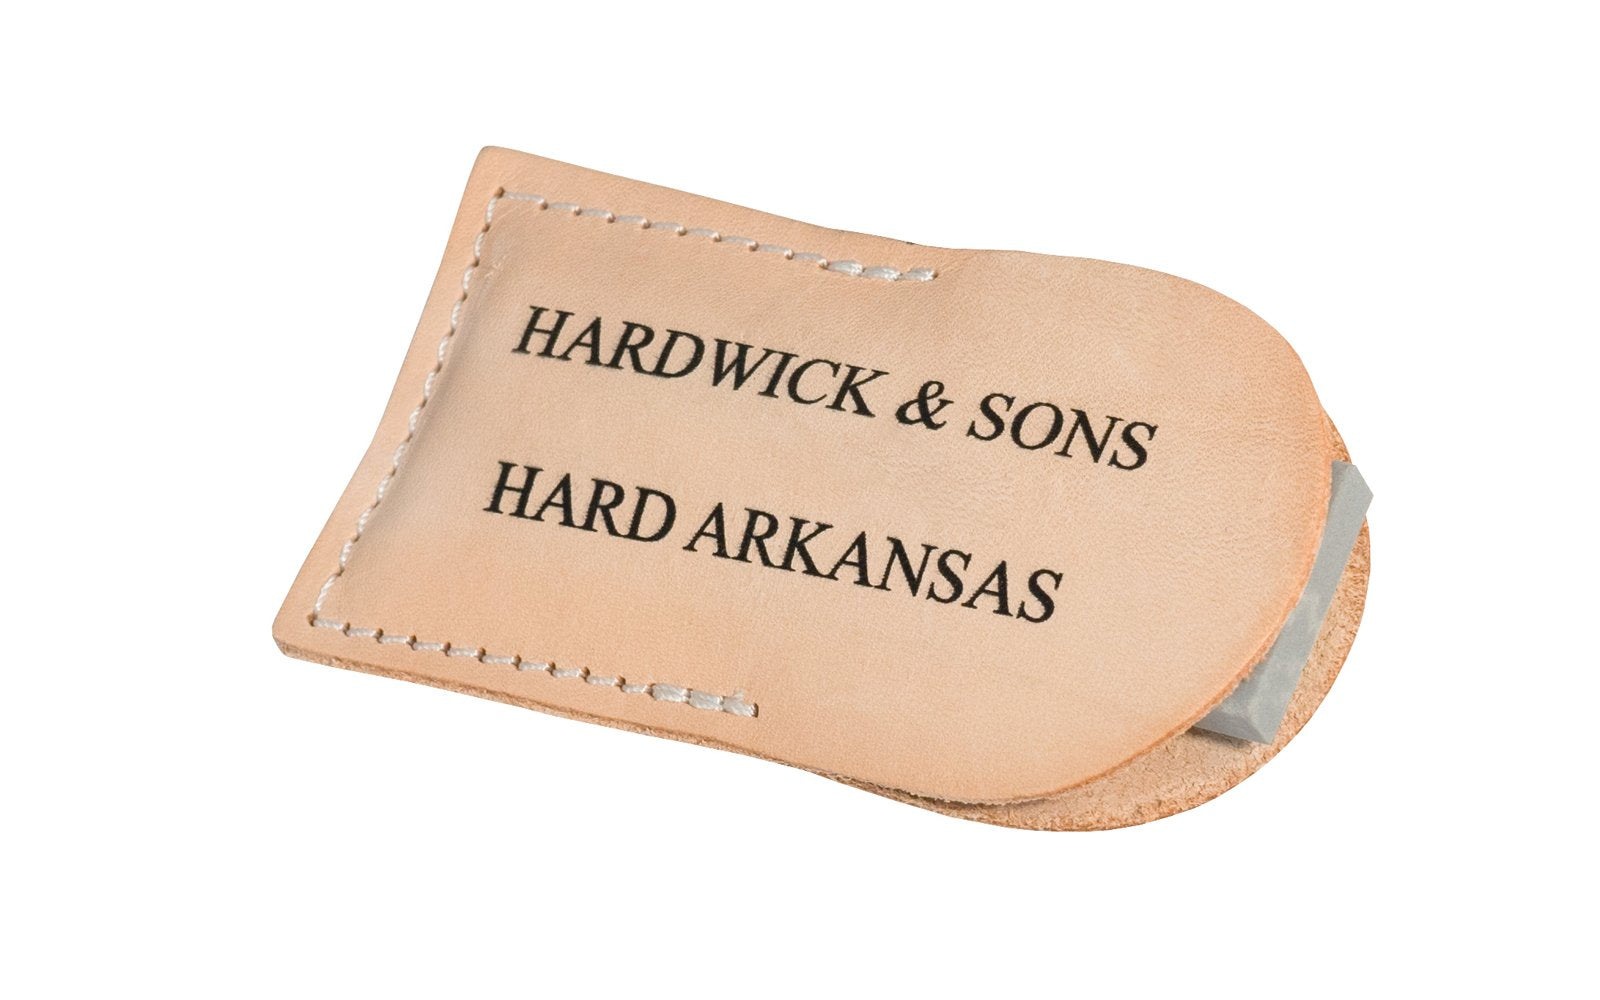 Hard Arkansas Slip Stone with Leather Pouch ~ 3" x 1" - Super-fine stone that is satisfactory for the final edge on woodworking cutting tools & knives - Made in USA - Model No. FAP-13A-L